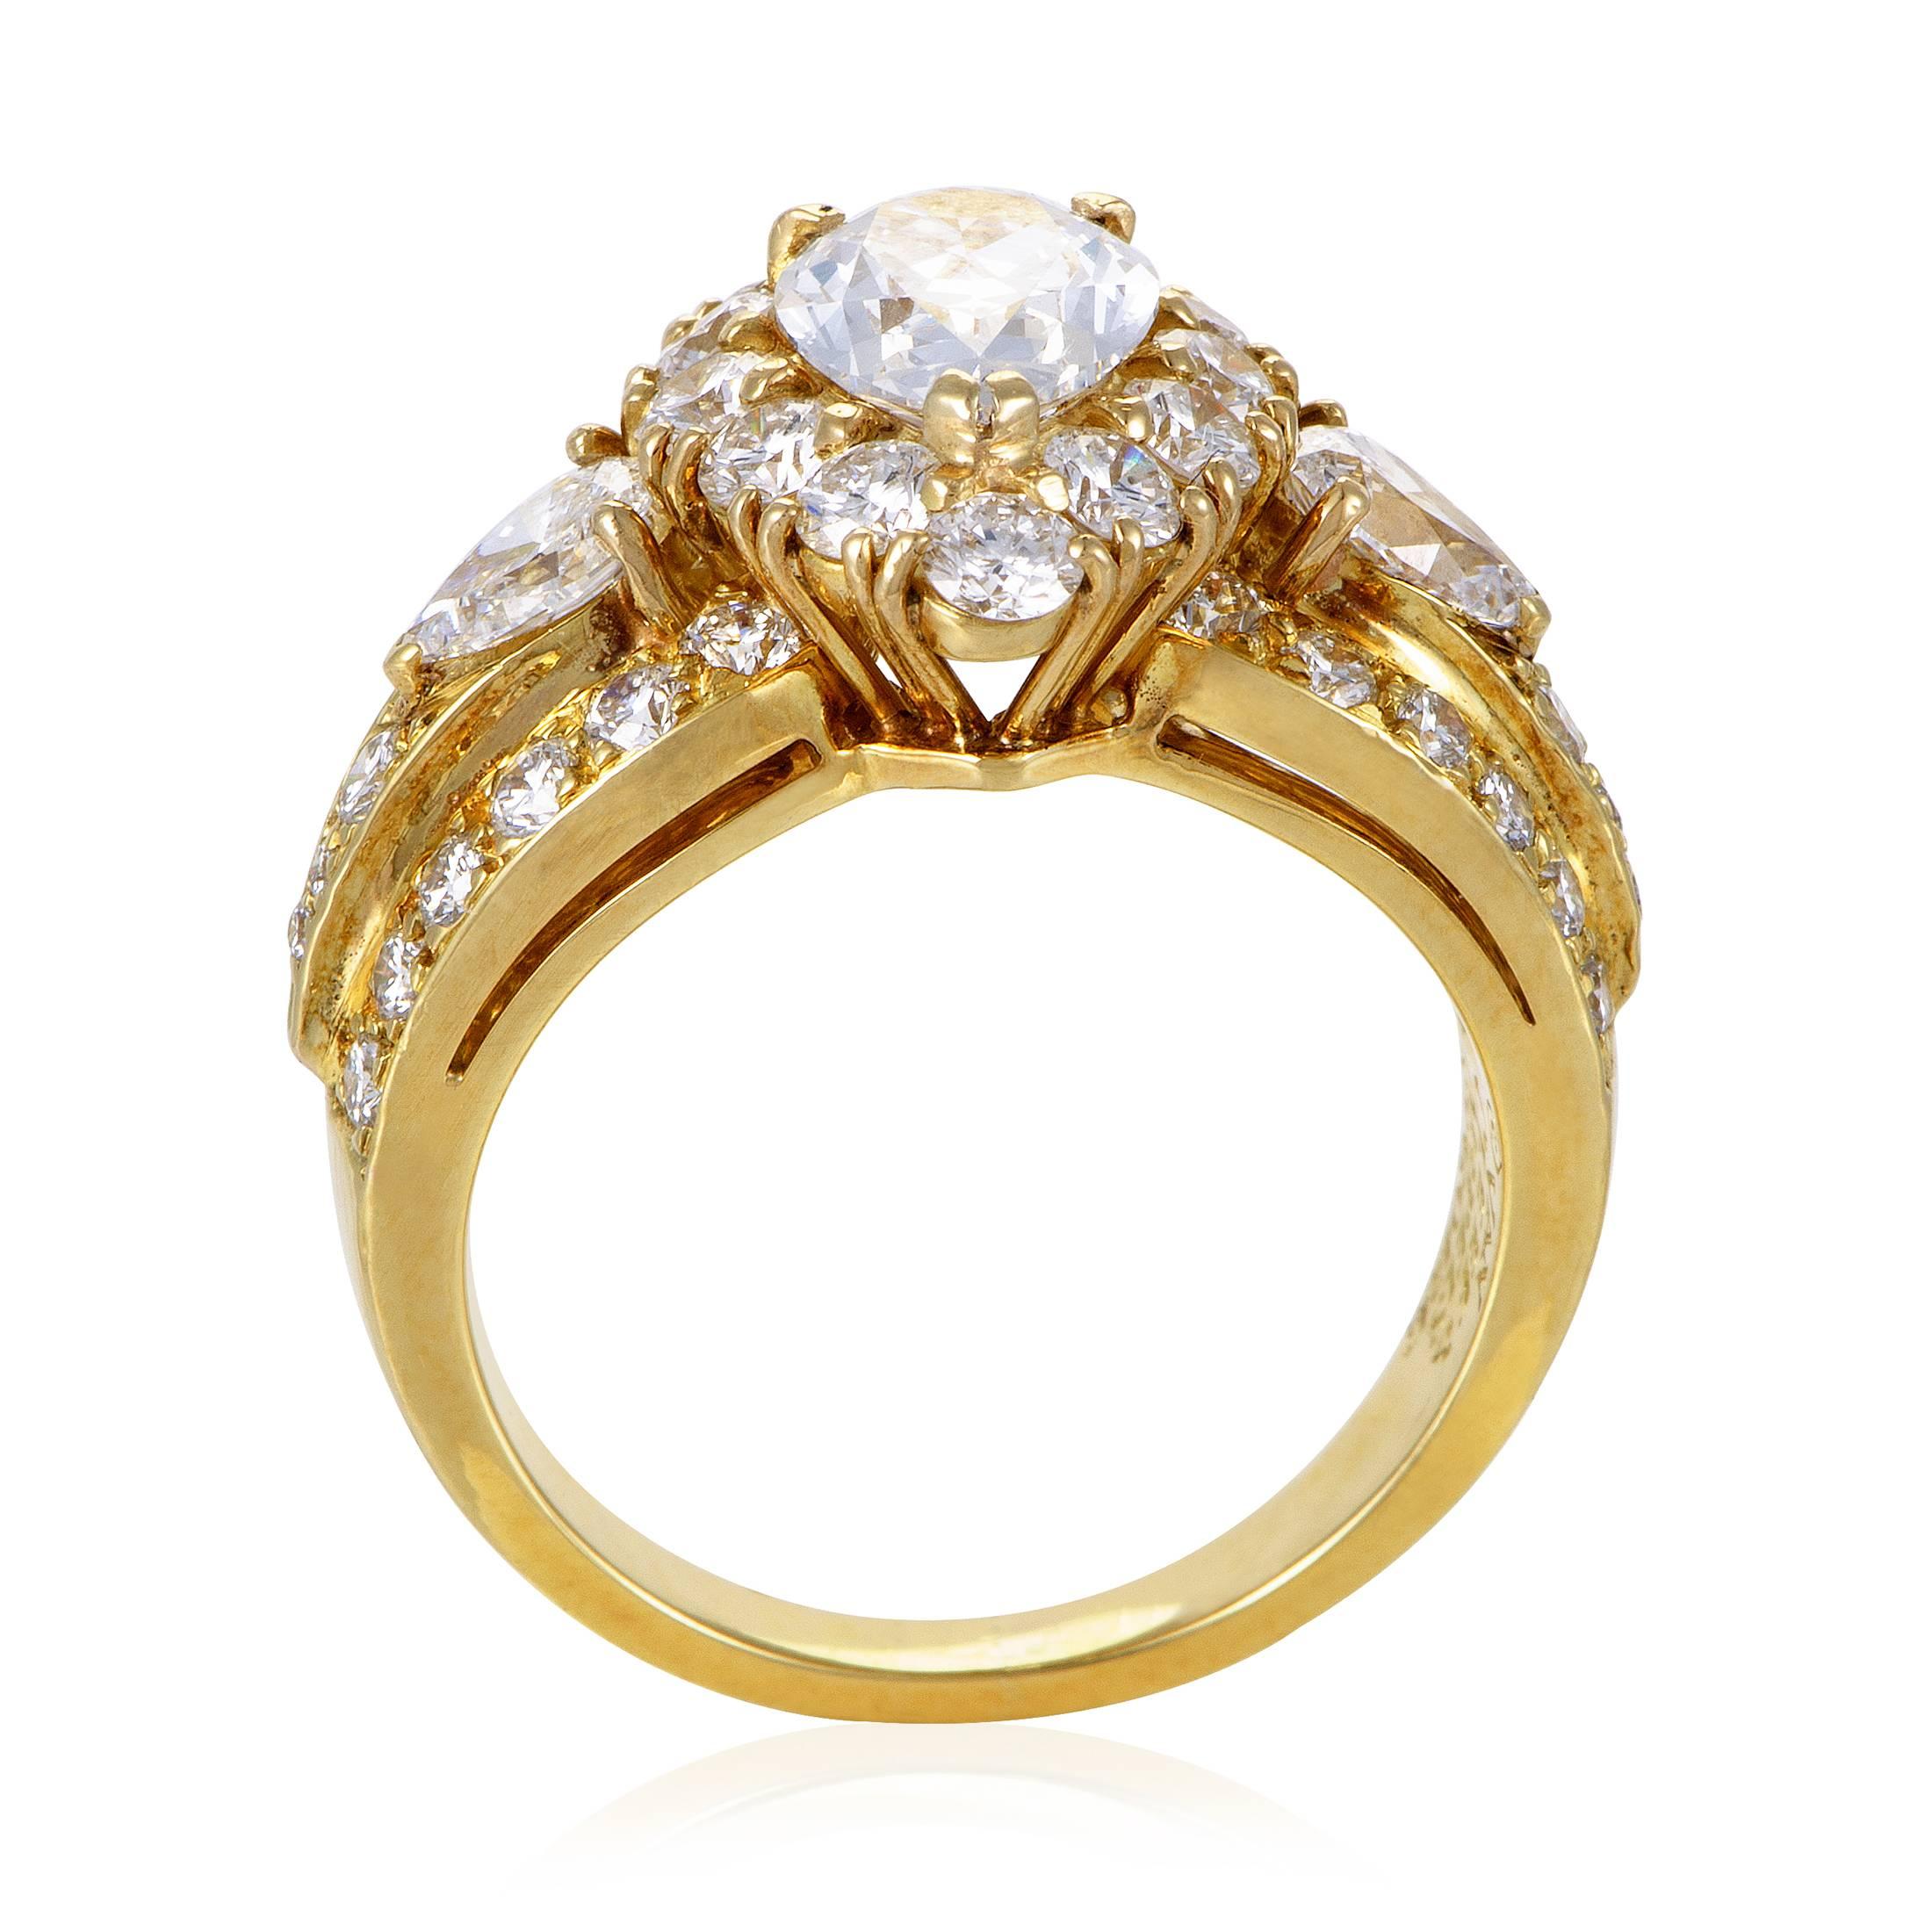 Rich with diamond resplendence and gold radiance, this majestic engagement ring from Van Cleef & Arpels is made of 18K yellow gold and embellished with dazzling EF-colored diamonds of VVS clarity totaling 1.75 carats with a stunning central